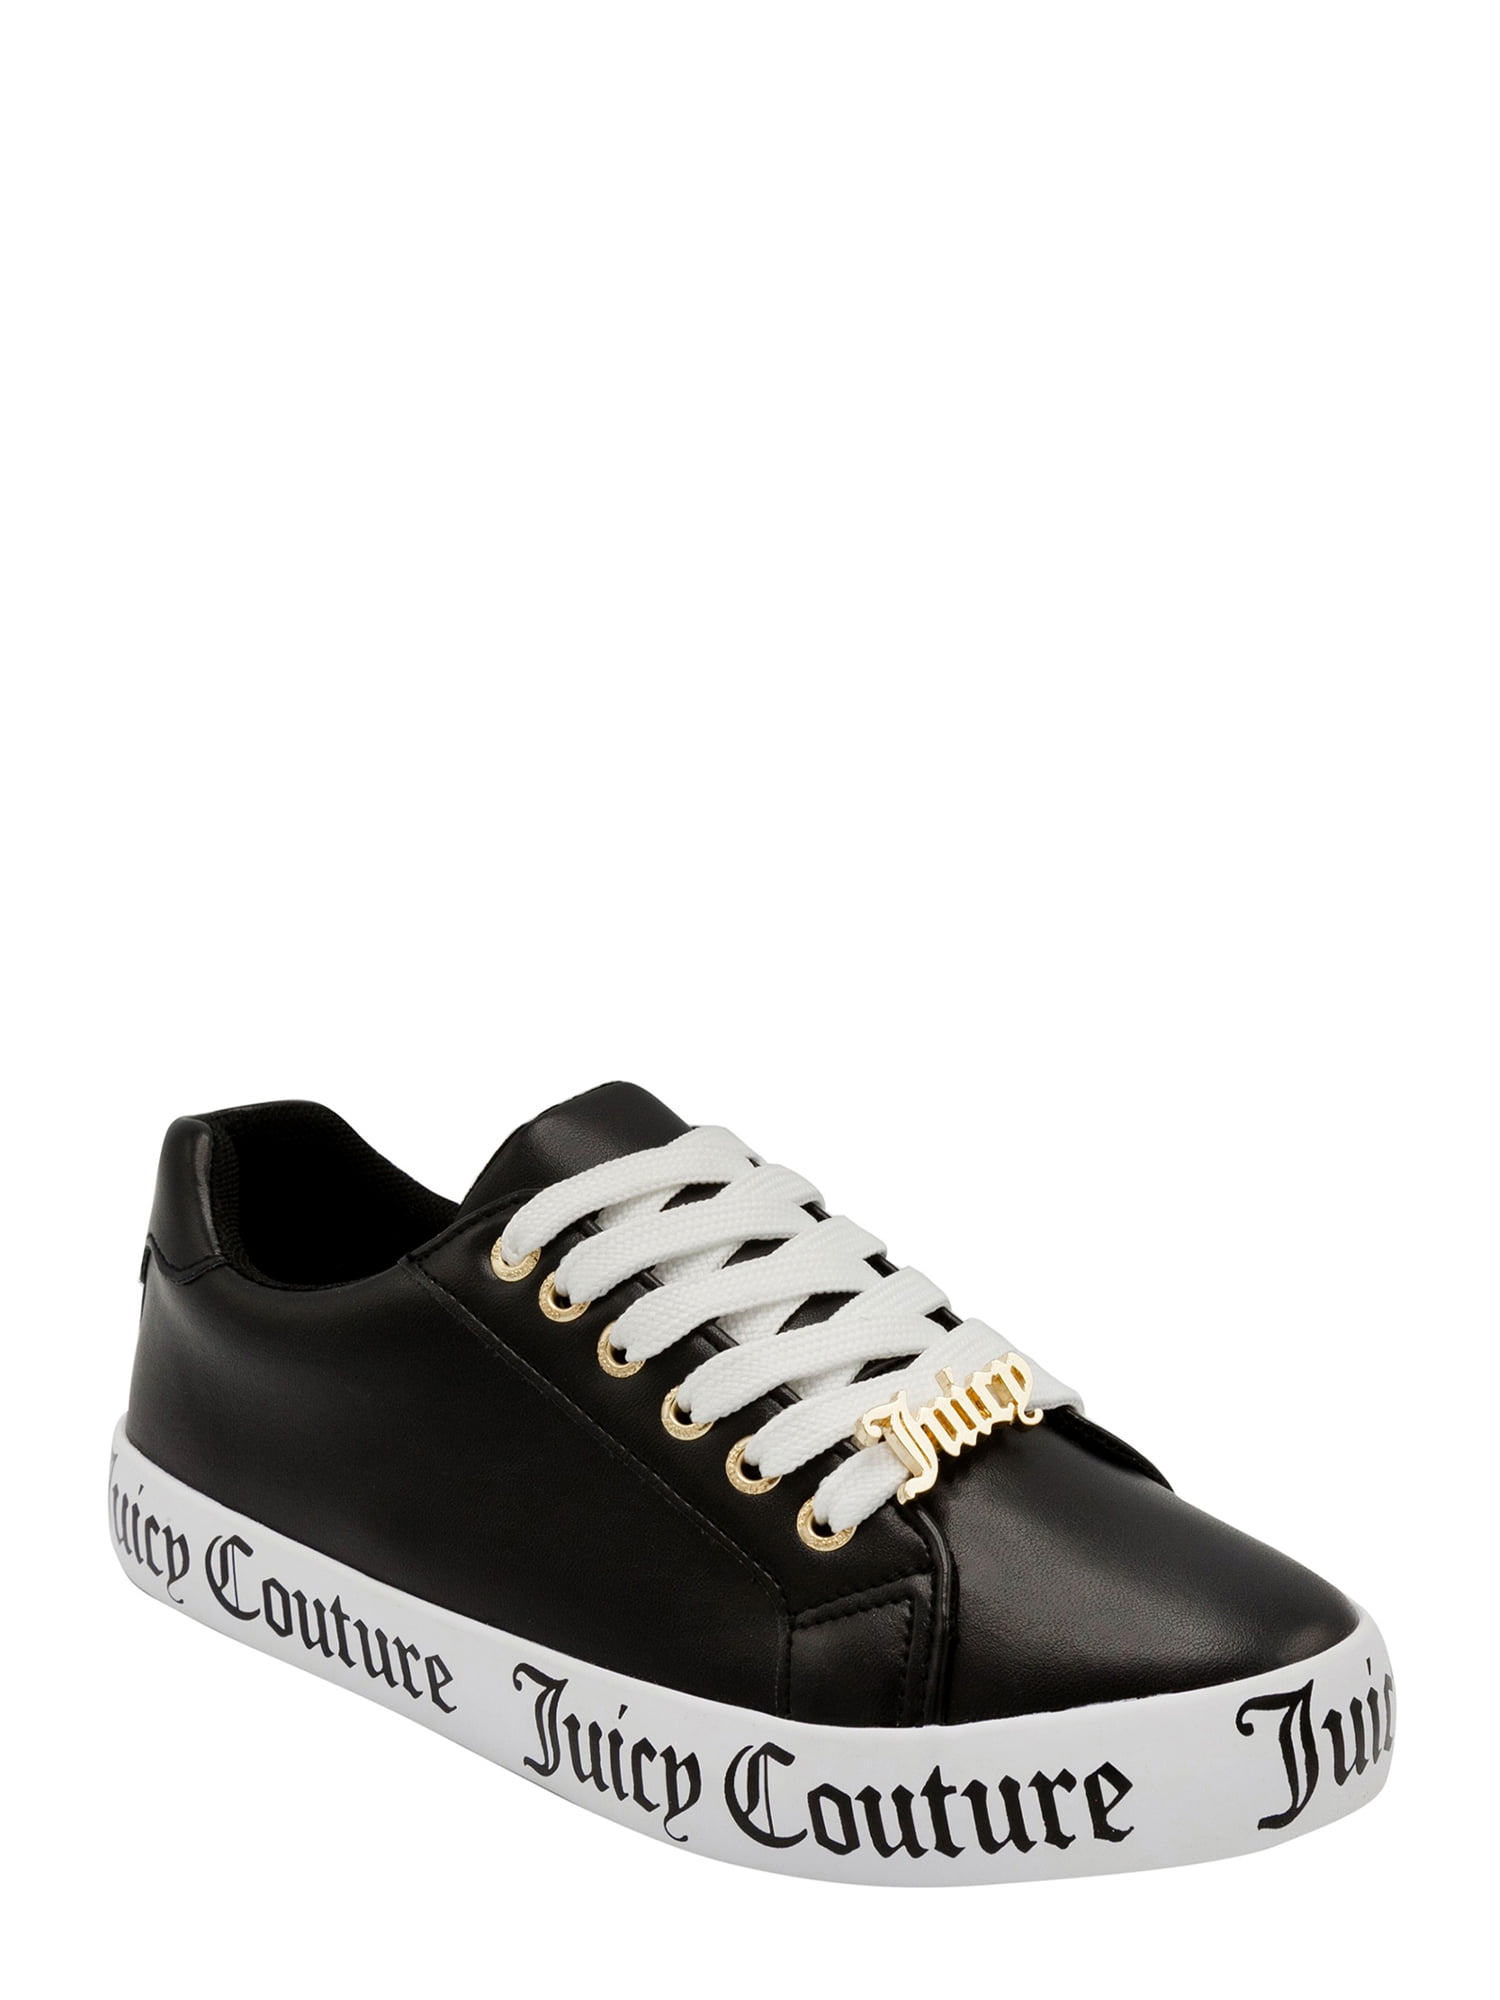 Aggregate more than 194 juicy couture shoes sneakers